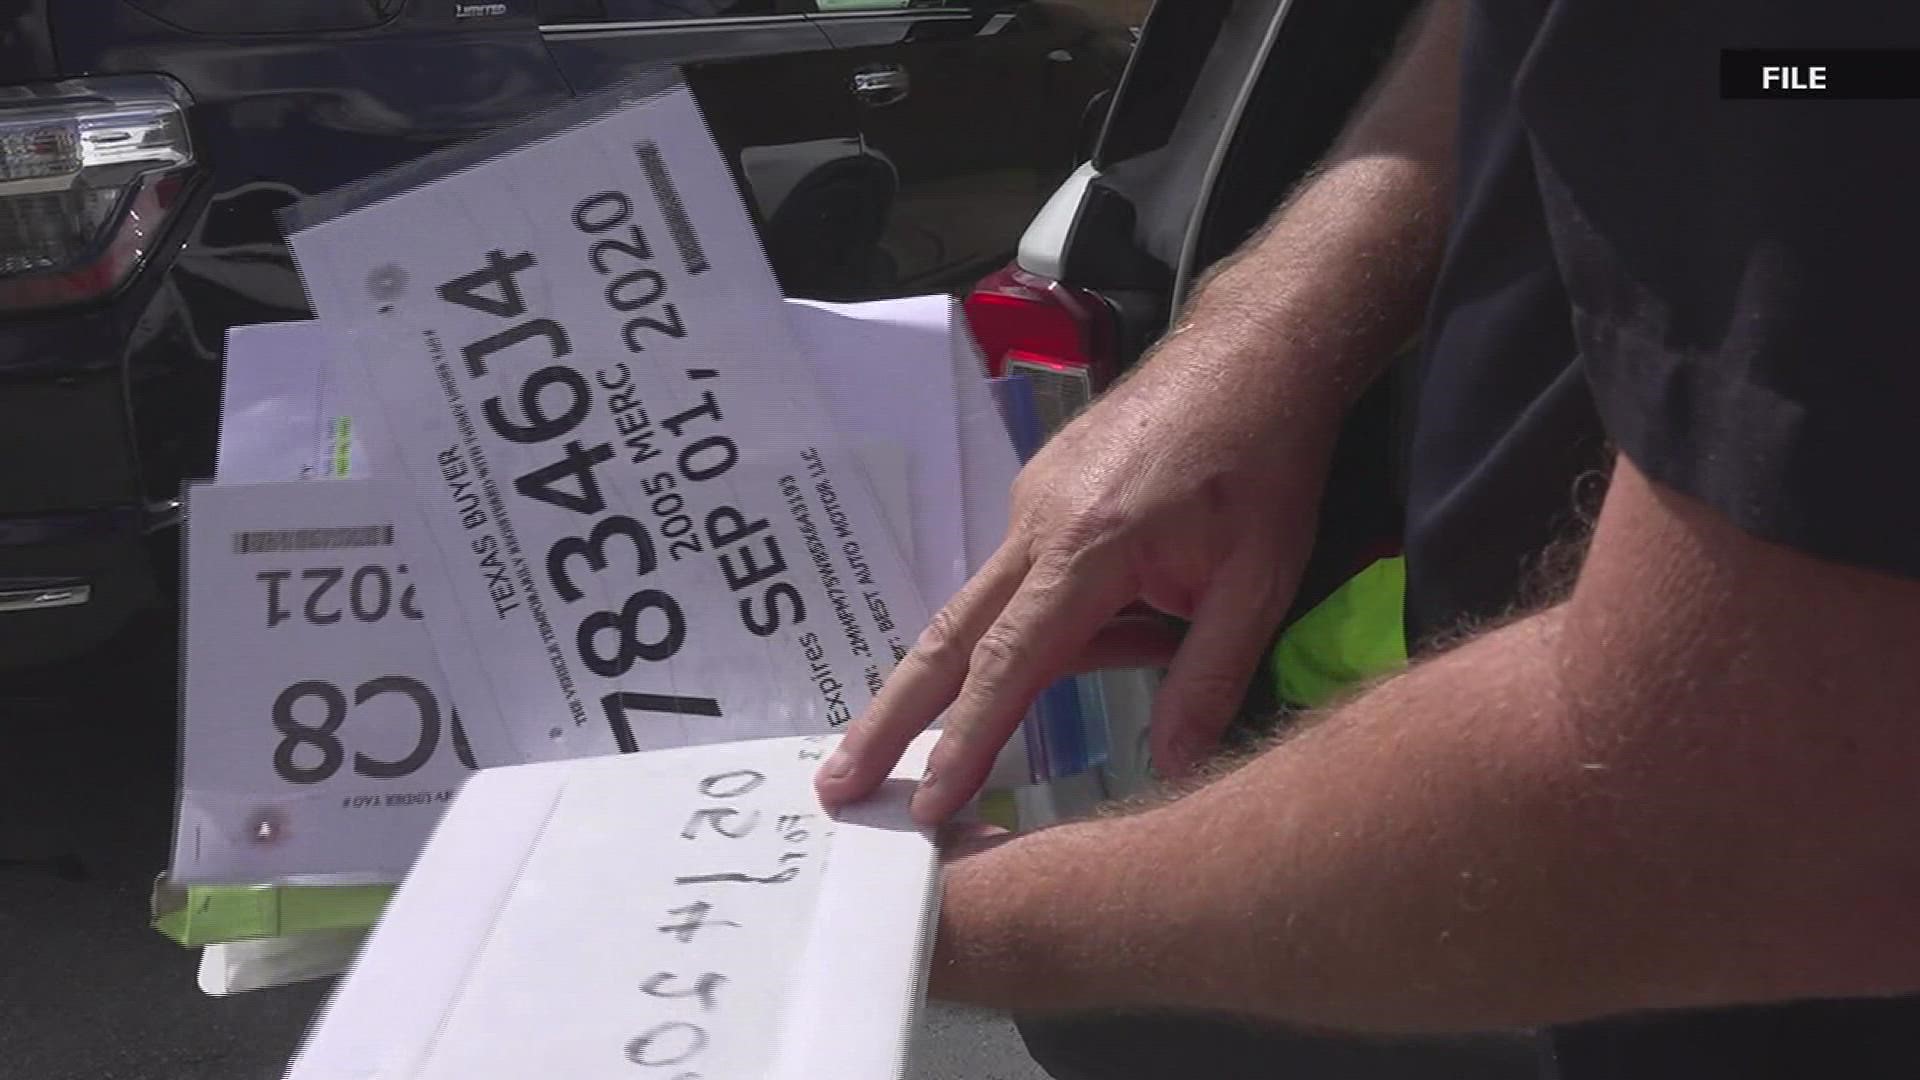 Vidor Police Department Captain Ed Martin says criminals riding around with fake tags could be involved in bank robberies, kidnapping and even human trafficking.